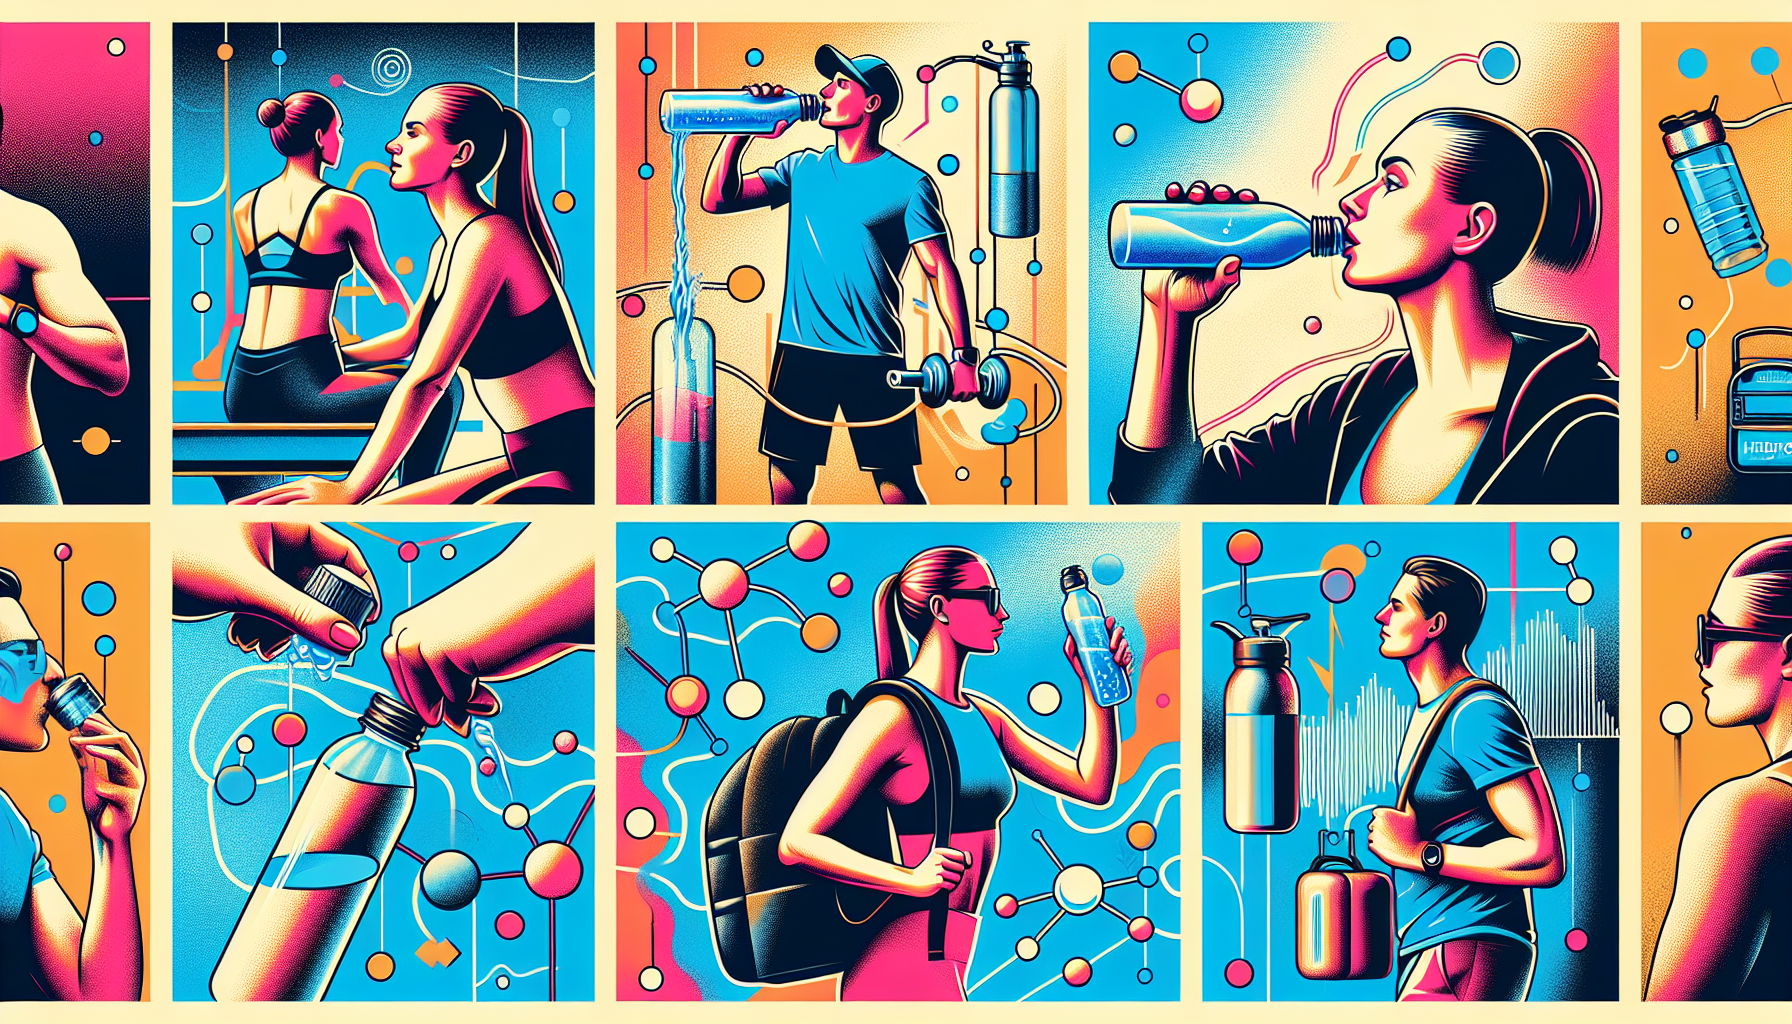 Illustration of various methods to incorporate hydrogen water into lifestyle